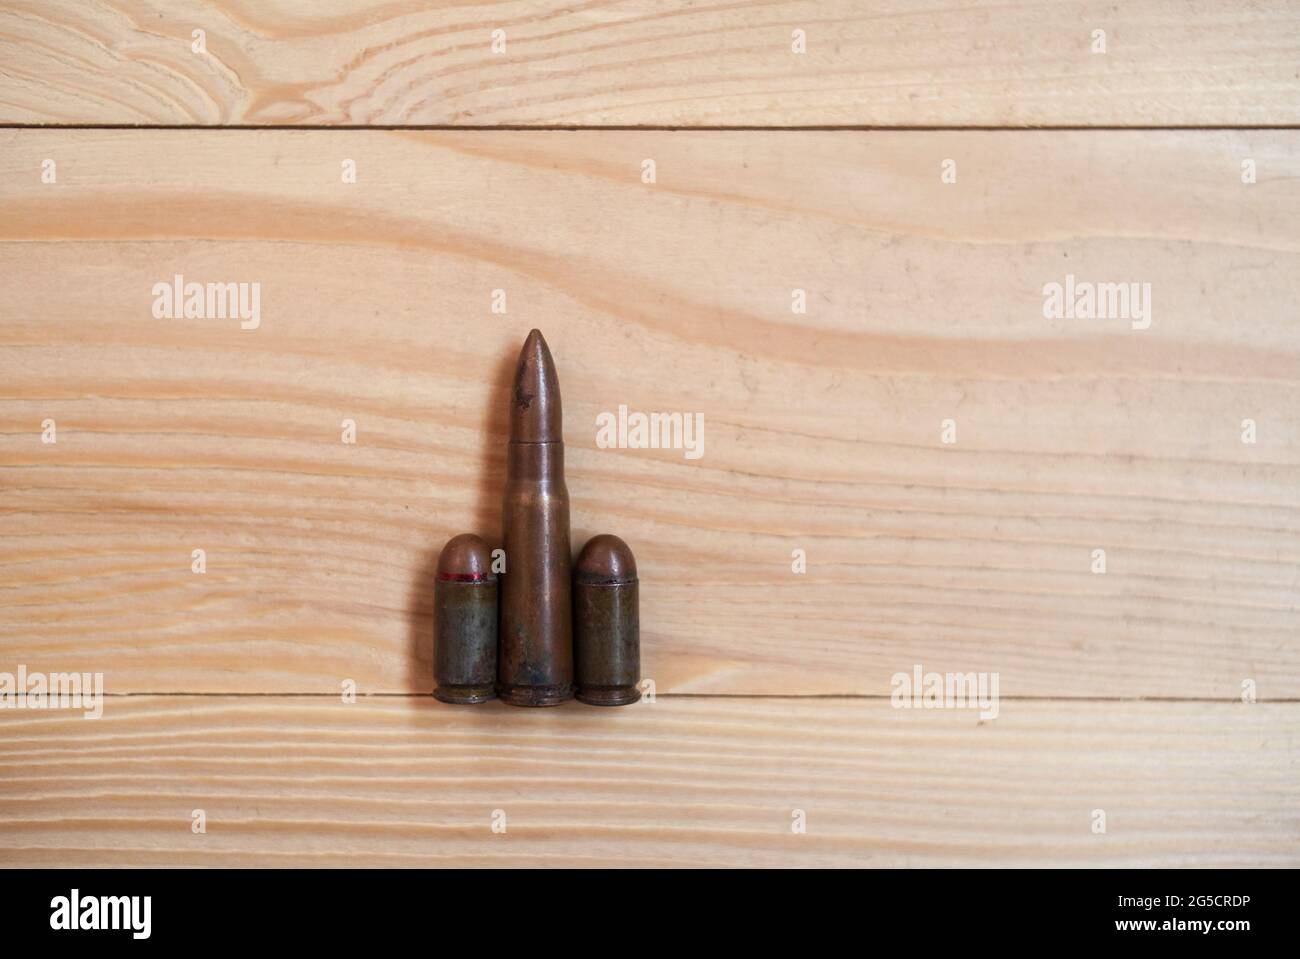 Bullets on a wooden background. Three different caliber bullets together on a wooden background. Military concept. Stock Photo